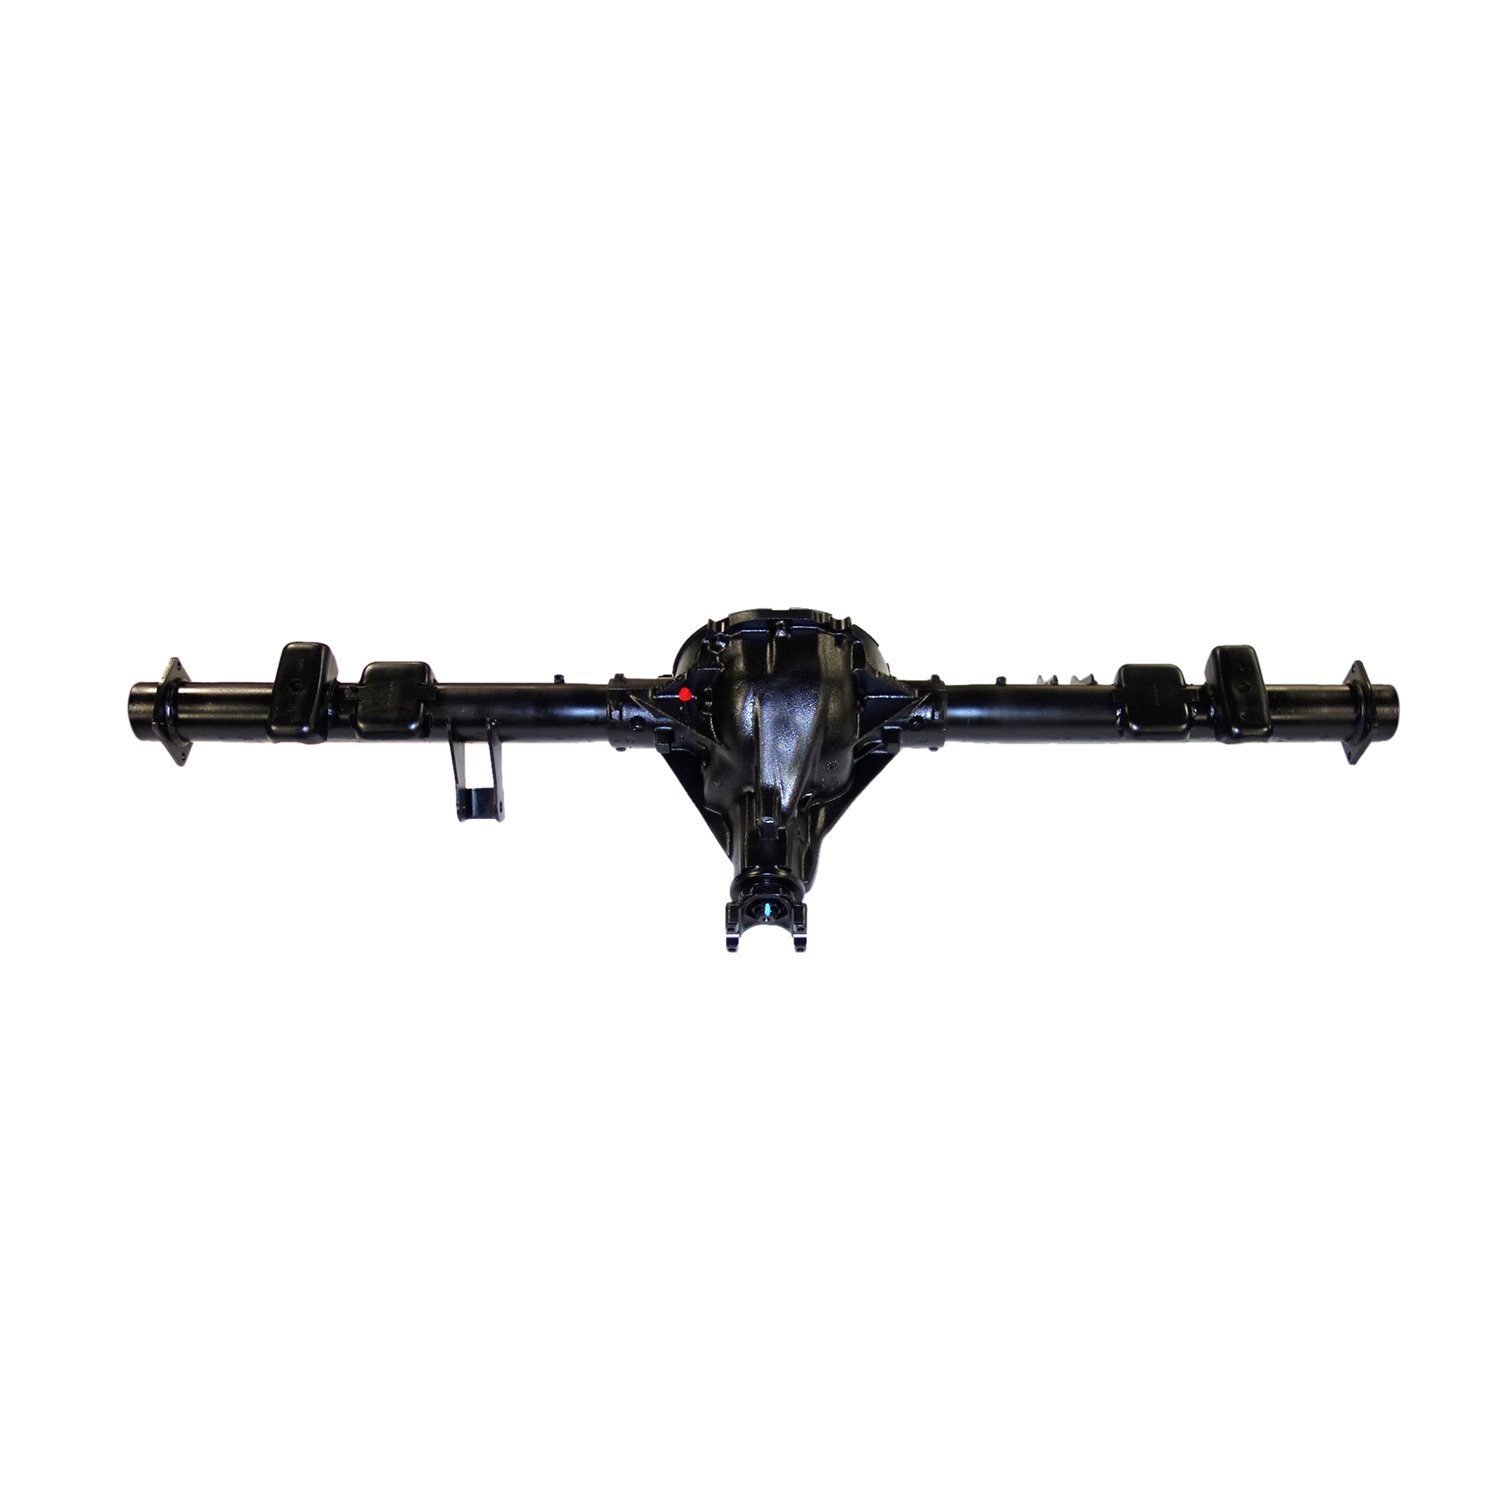 Remanufactured Complete Axle Assy for GM 9.5" 95-99 GM Suburban 1500 3.42 , 4x4, 8 Lug